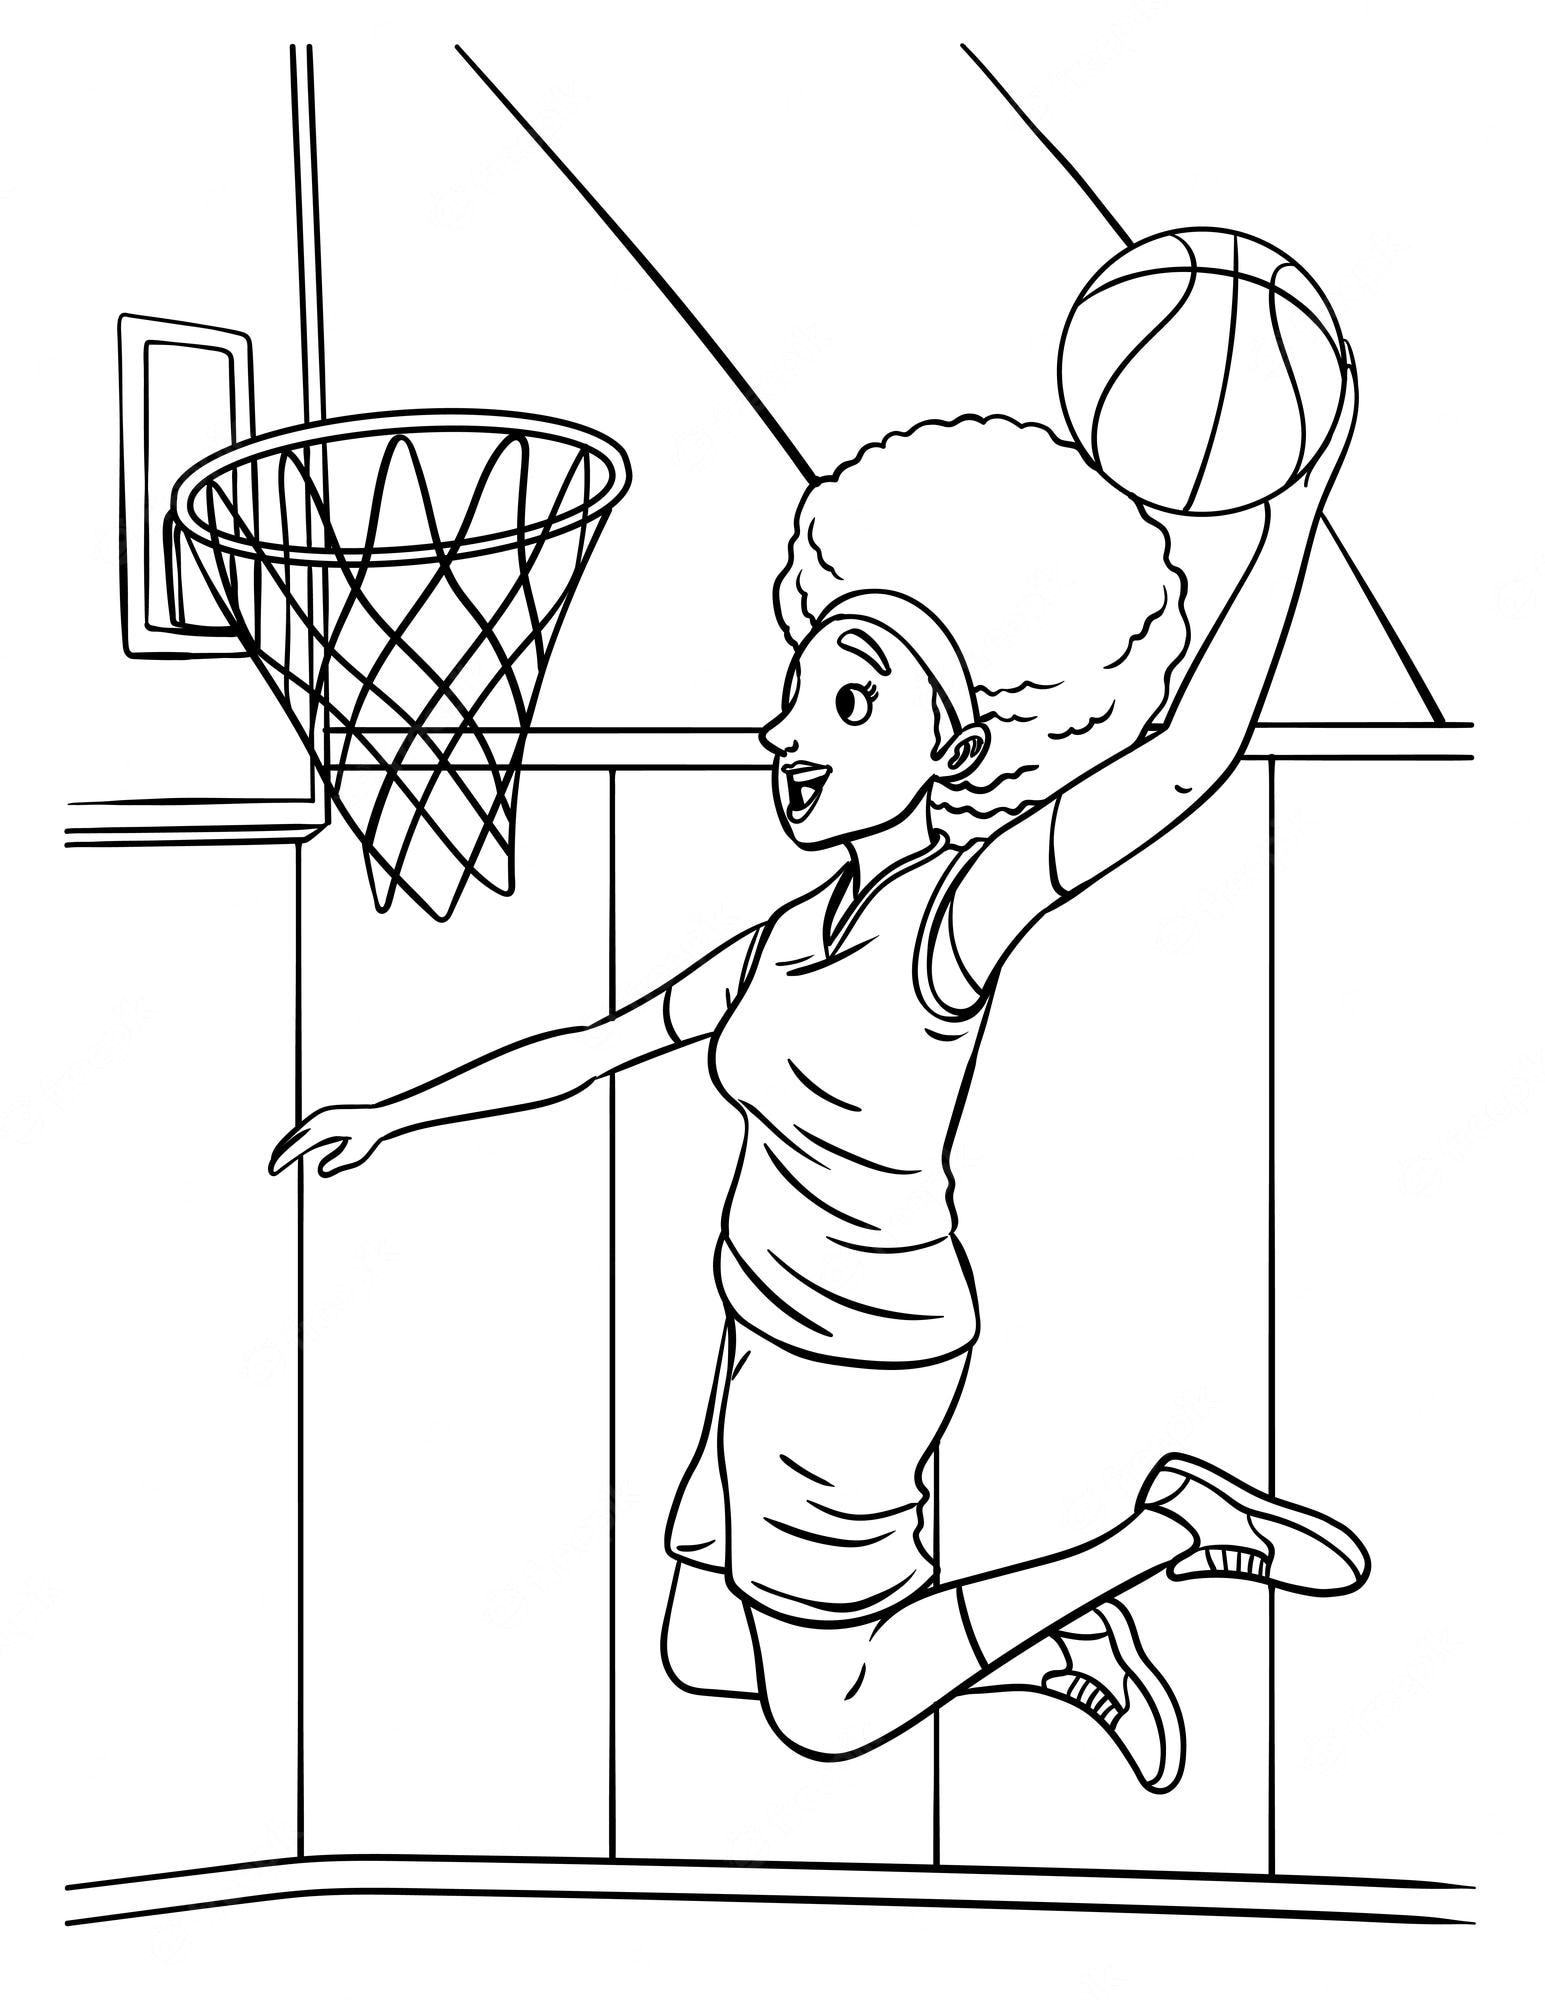 Premium Vector | Basketball girl slam dunk coloring page for kids